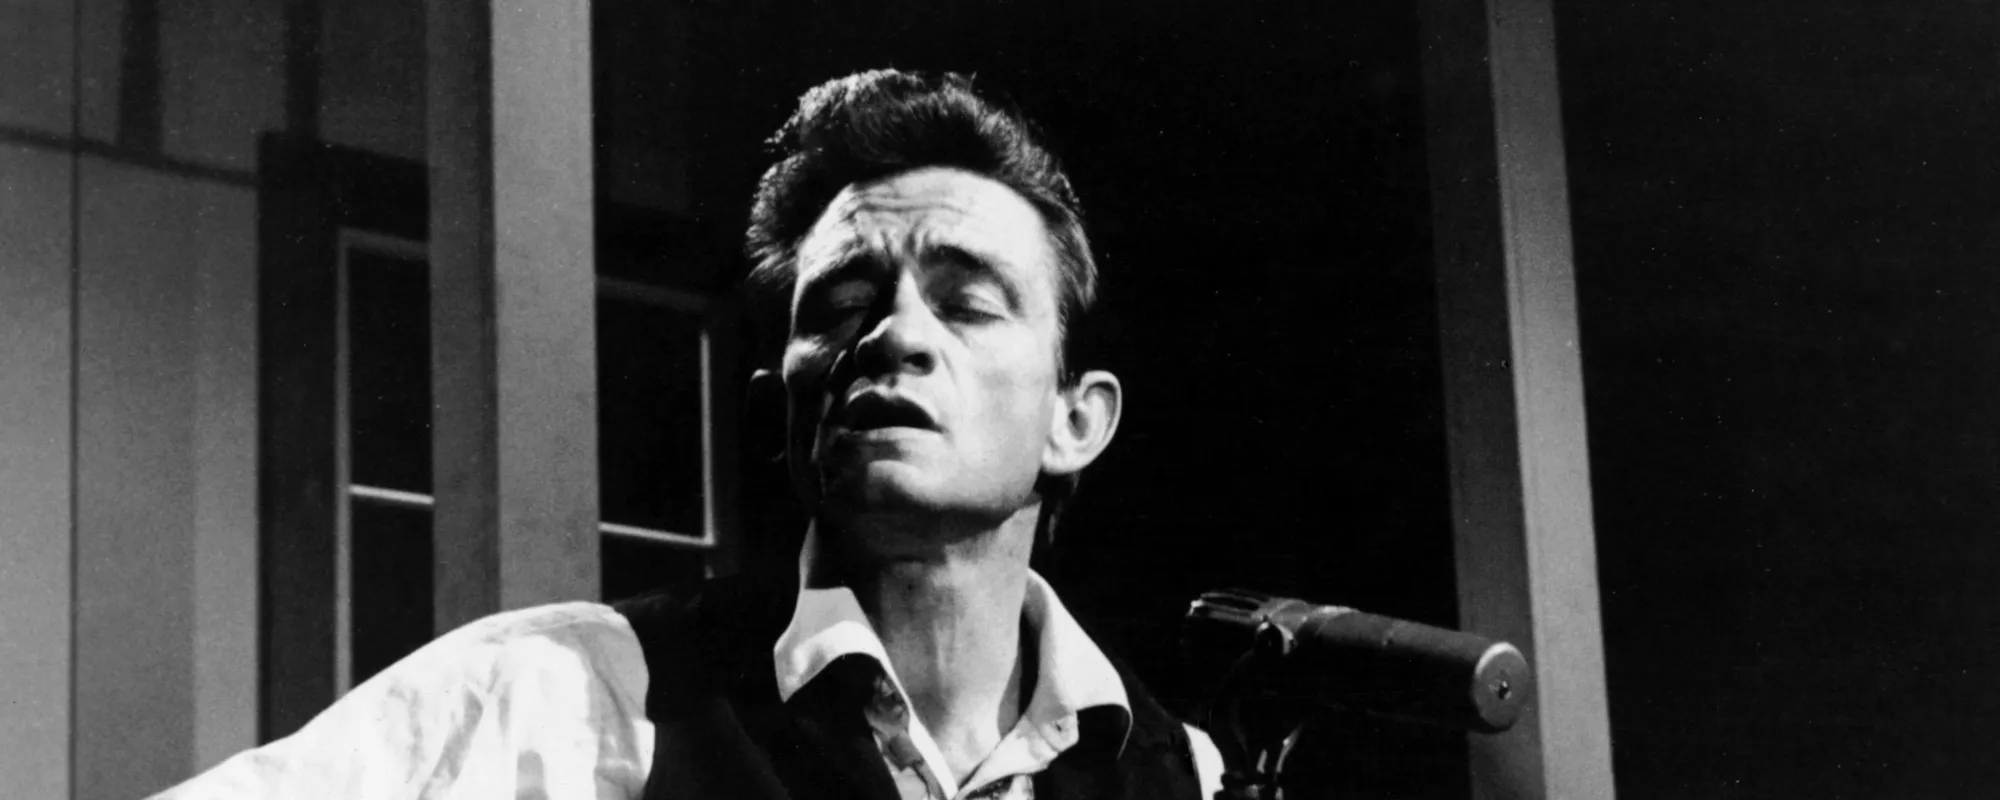 10 Songs You Didn’t Know Johnny Cash Wrote for Other Artists